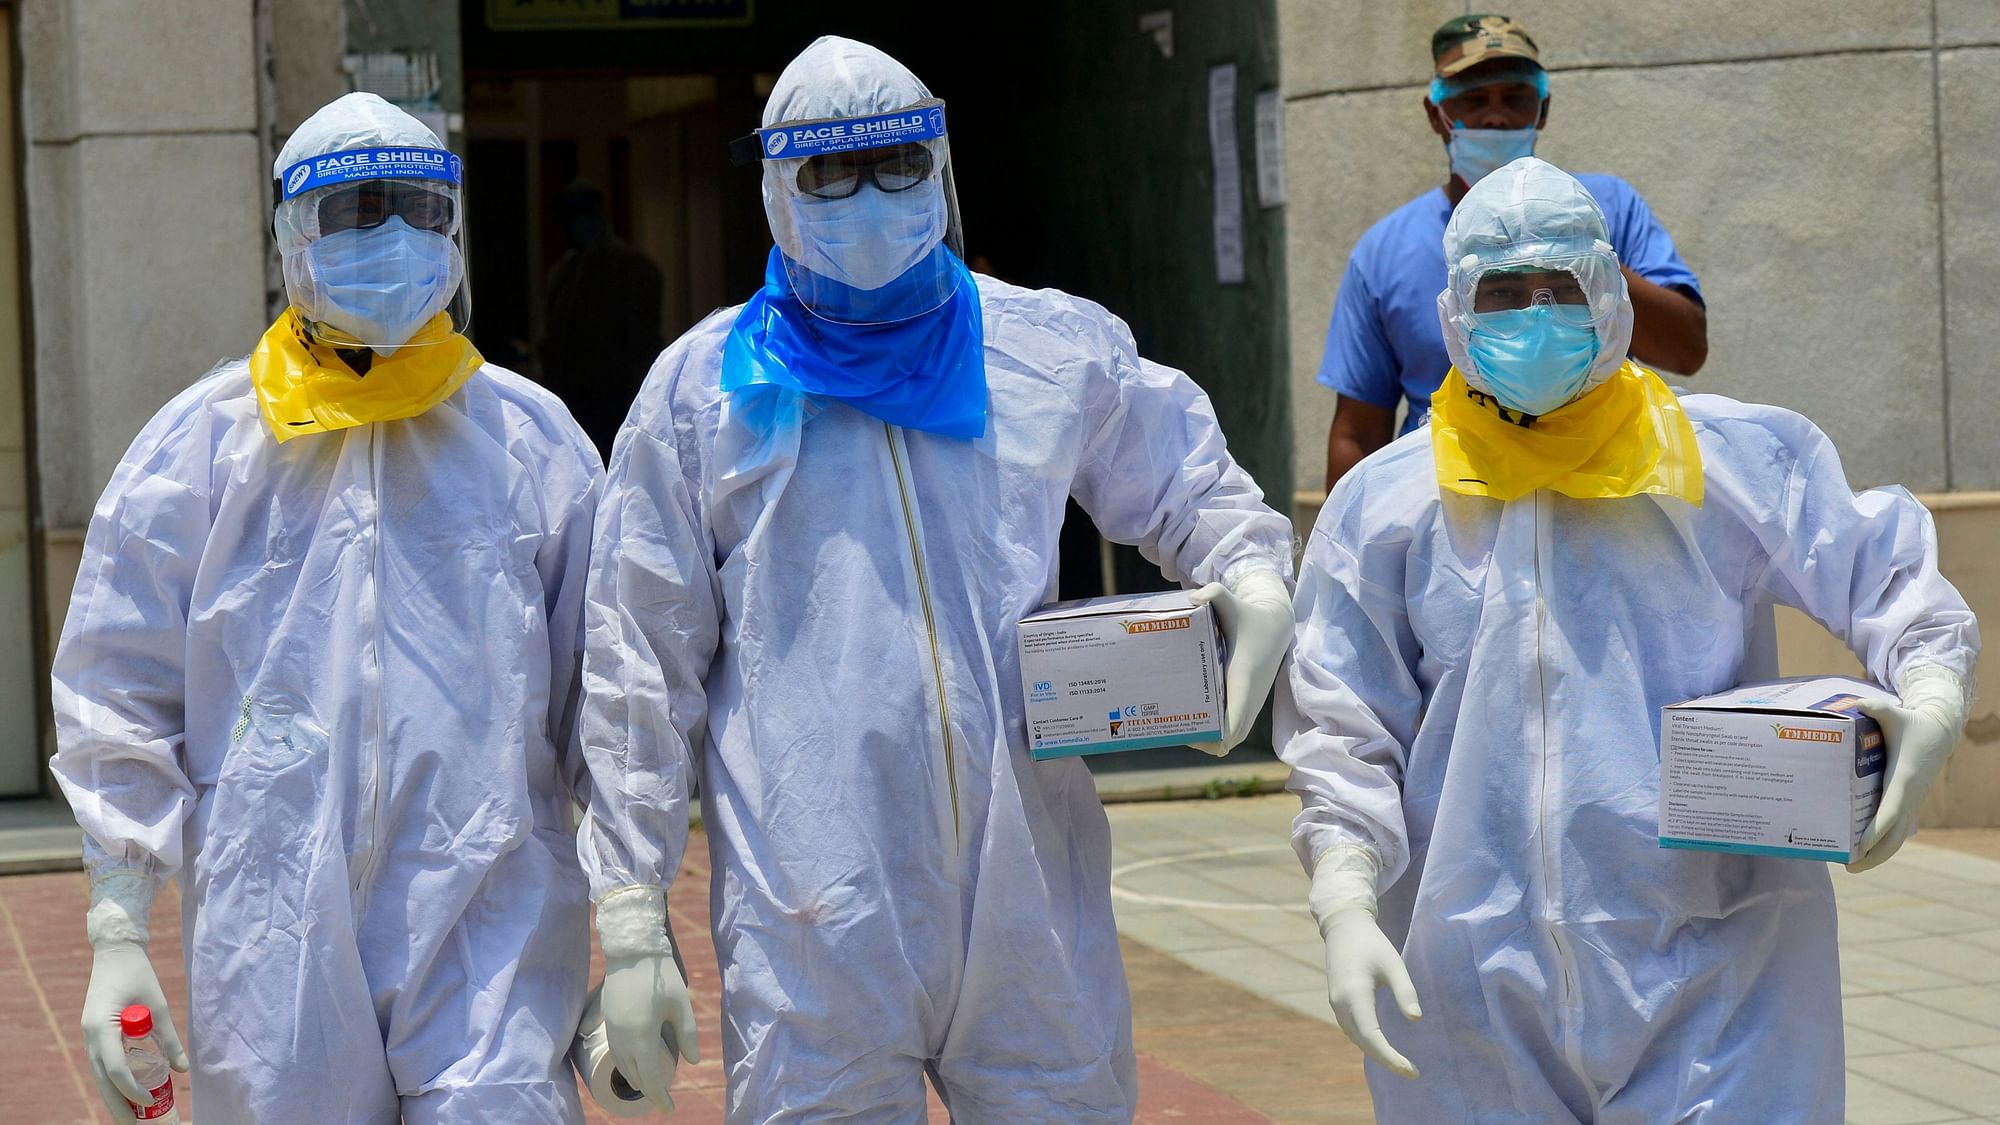 Medics arrive to take samples of suspected COVID-19 patients for lab tests at a government hospital in New Delhi. Image used for representation.